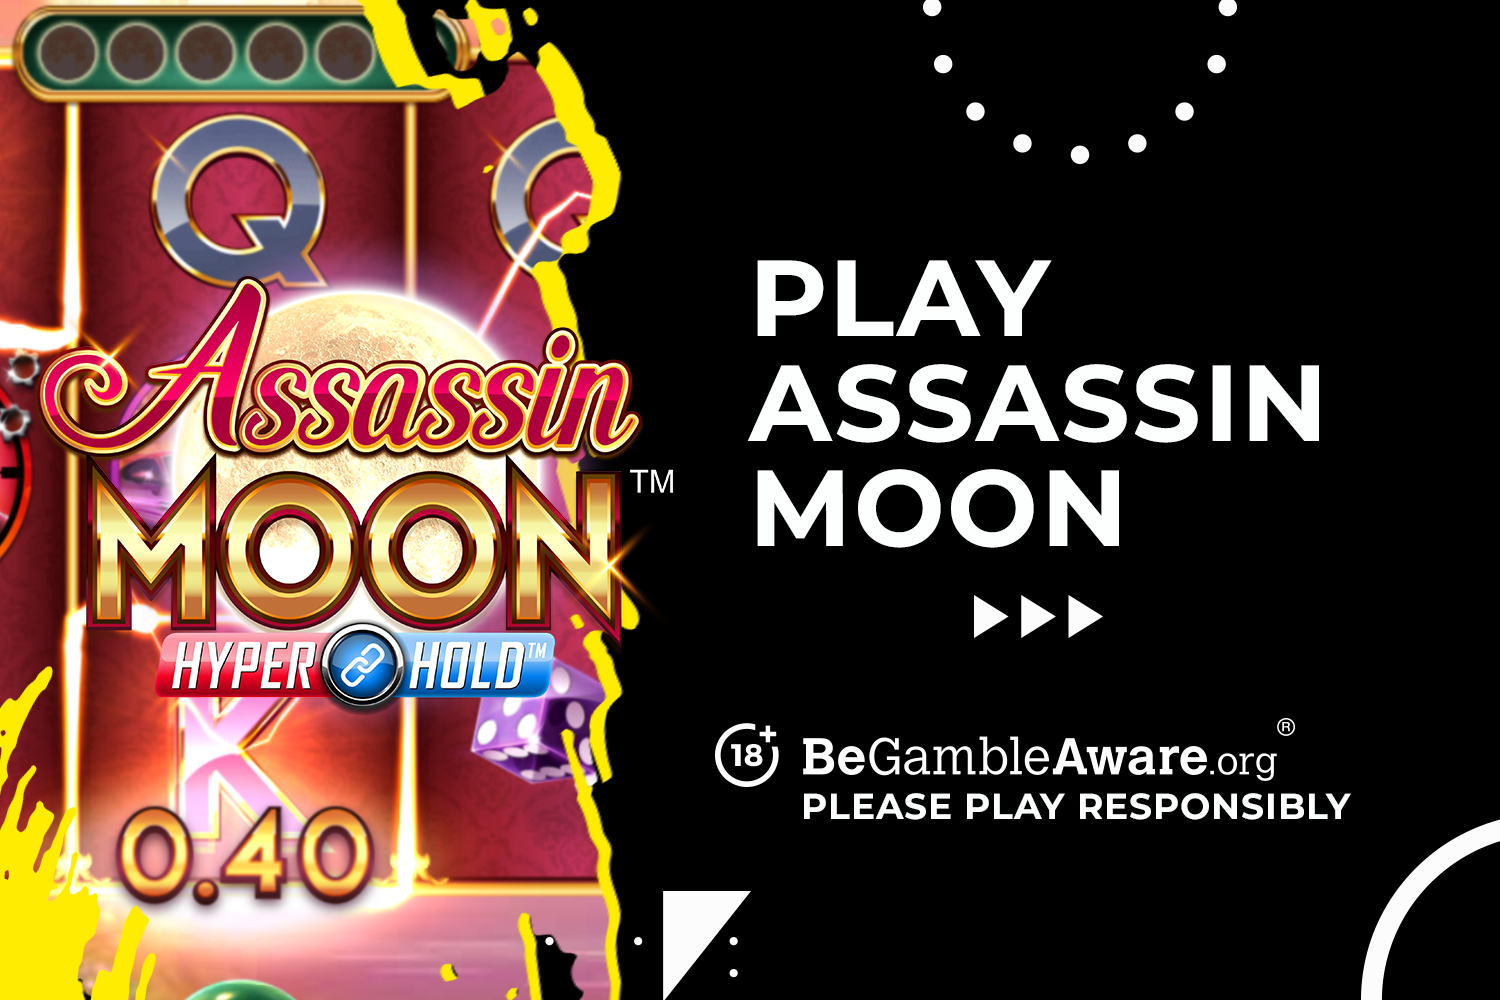 Assassin Moon slot review: Features, bonuses, and tips